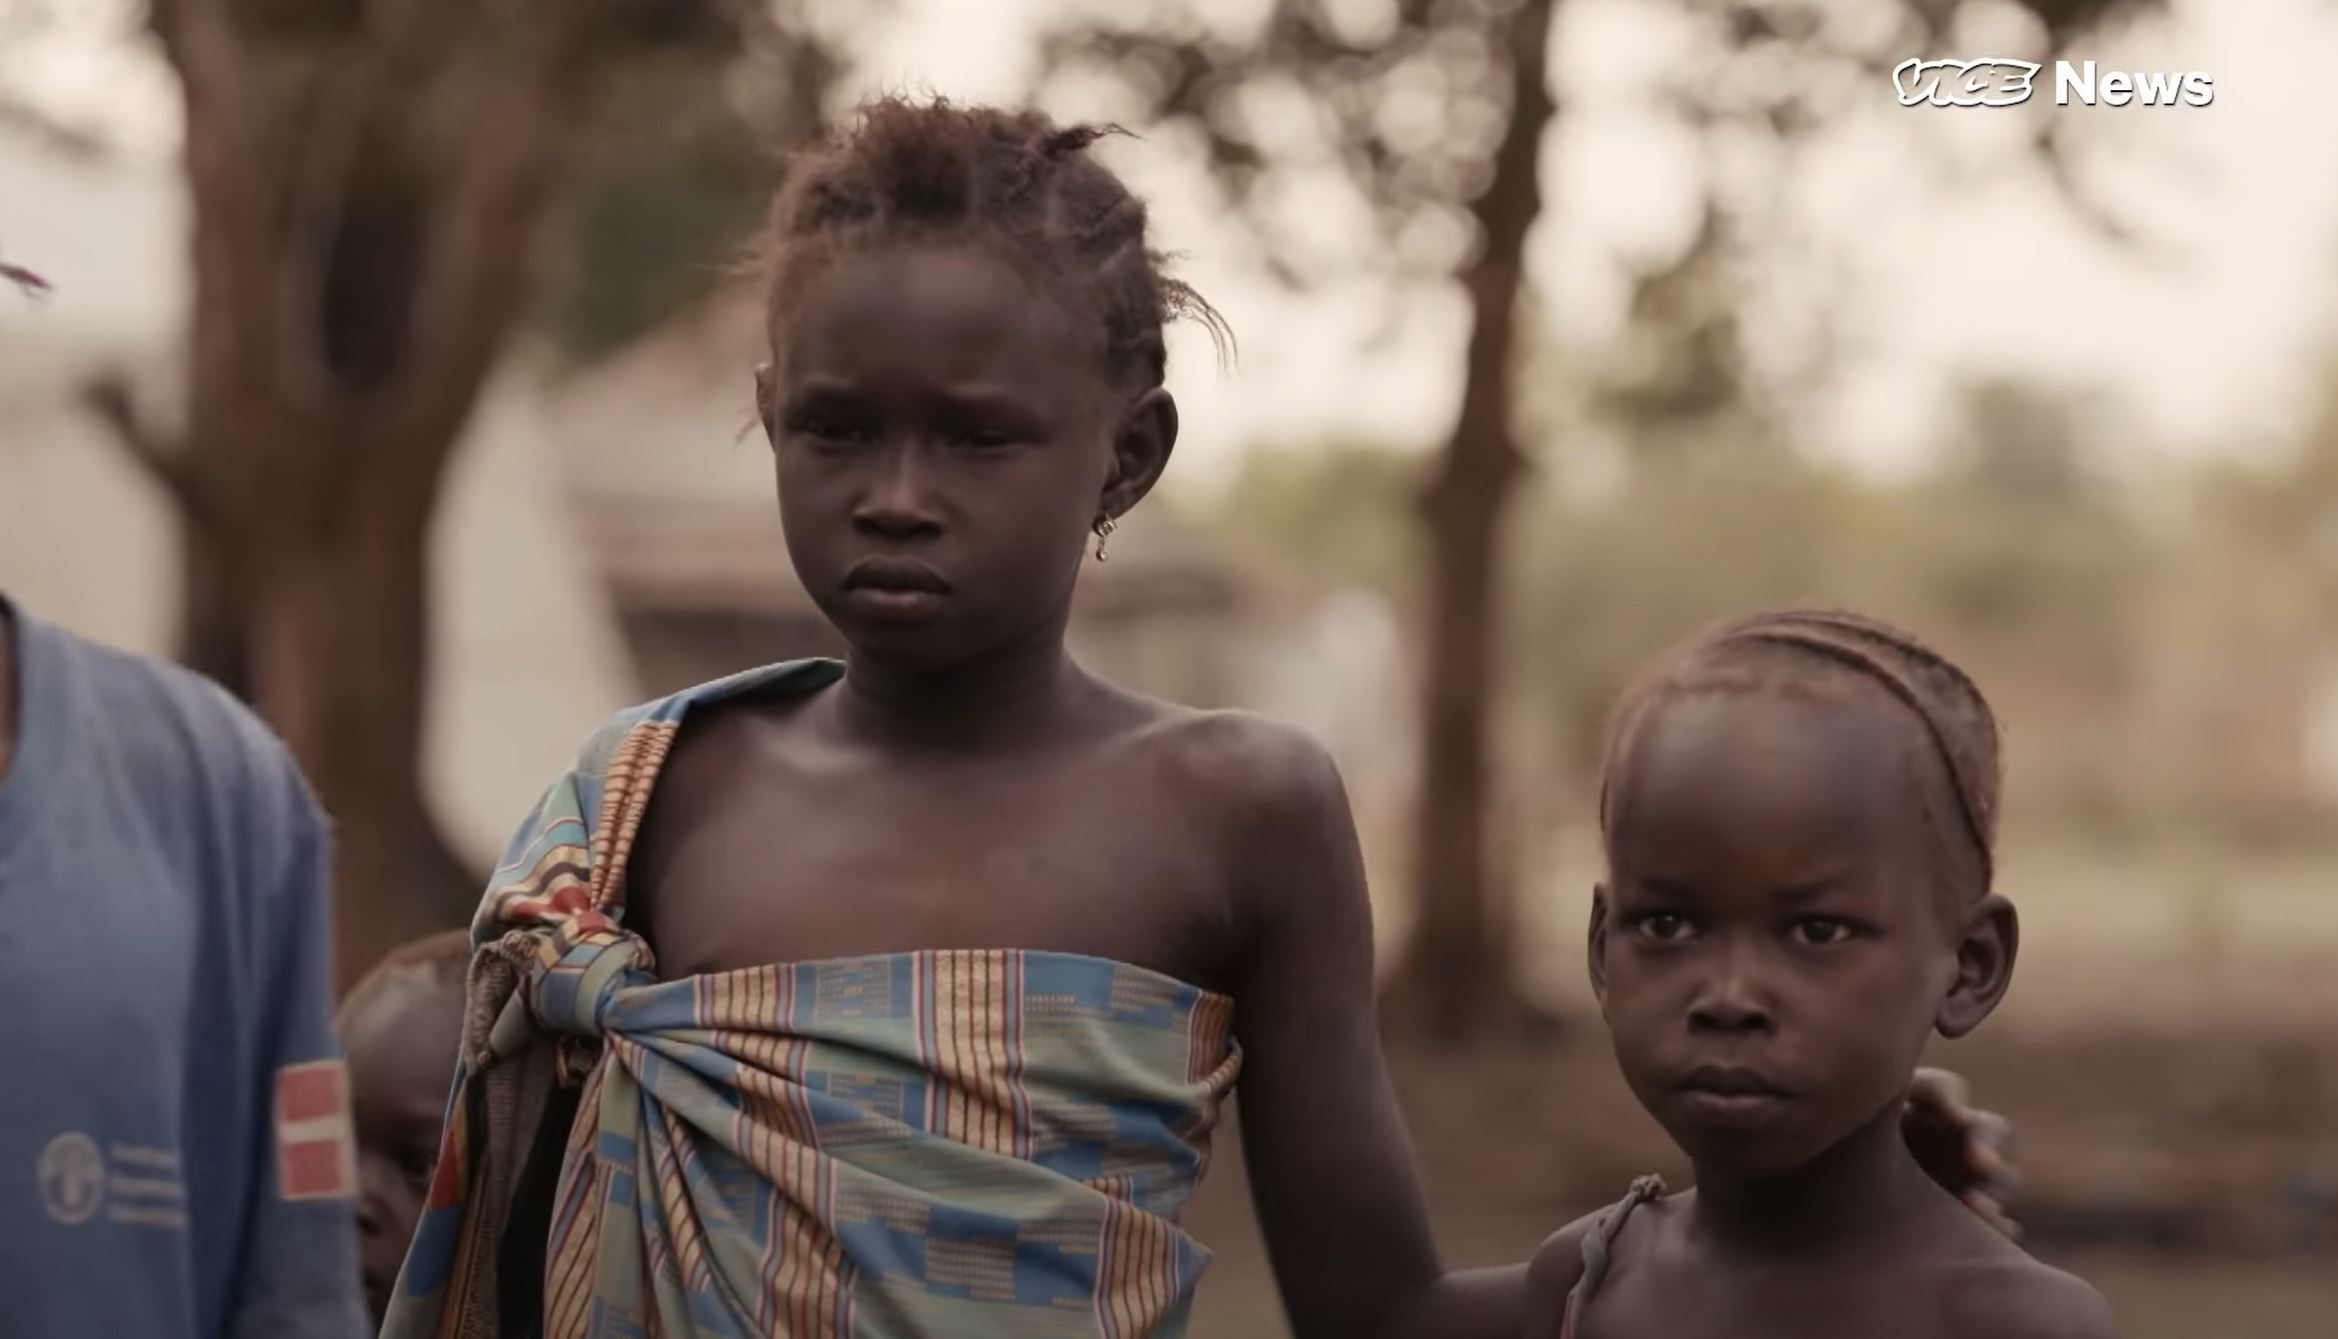 Stealing and Selling Children Became a Business in South Sudan